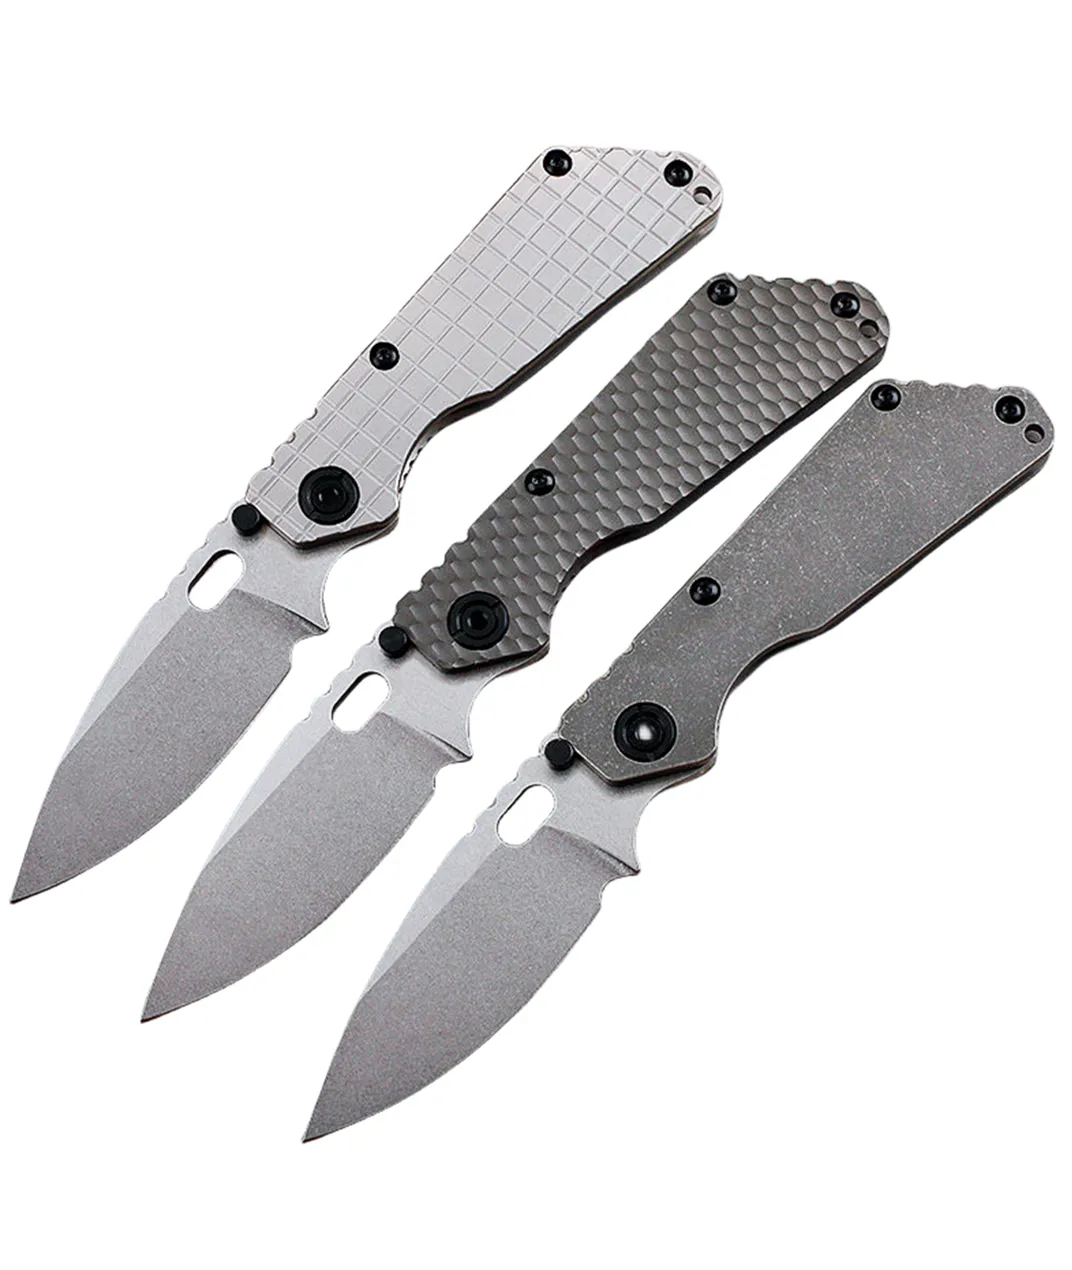 New High End ST LC Folding Knife D2 Stone Wash Drop Point Blade CNC TC4 Titanium Alloy Handle Ball Bearing Washer EDC Pocket Knives